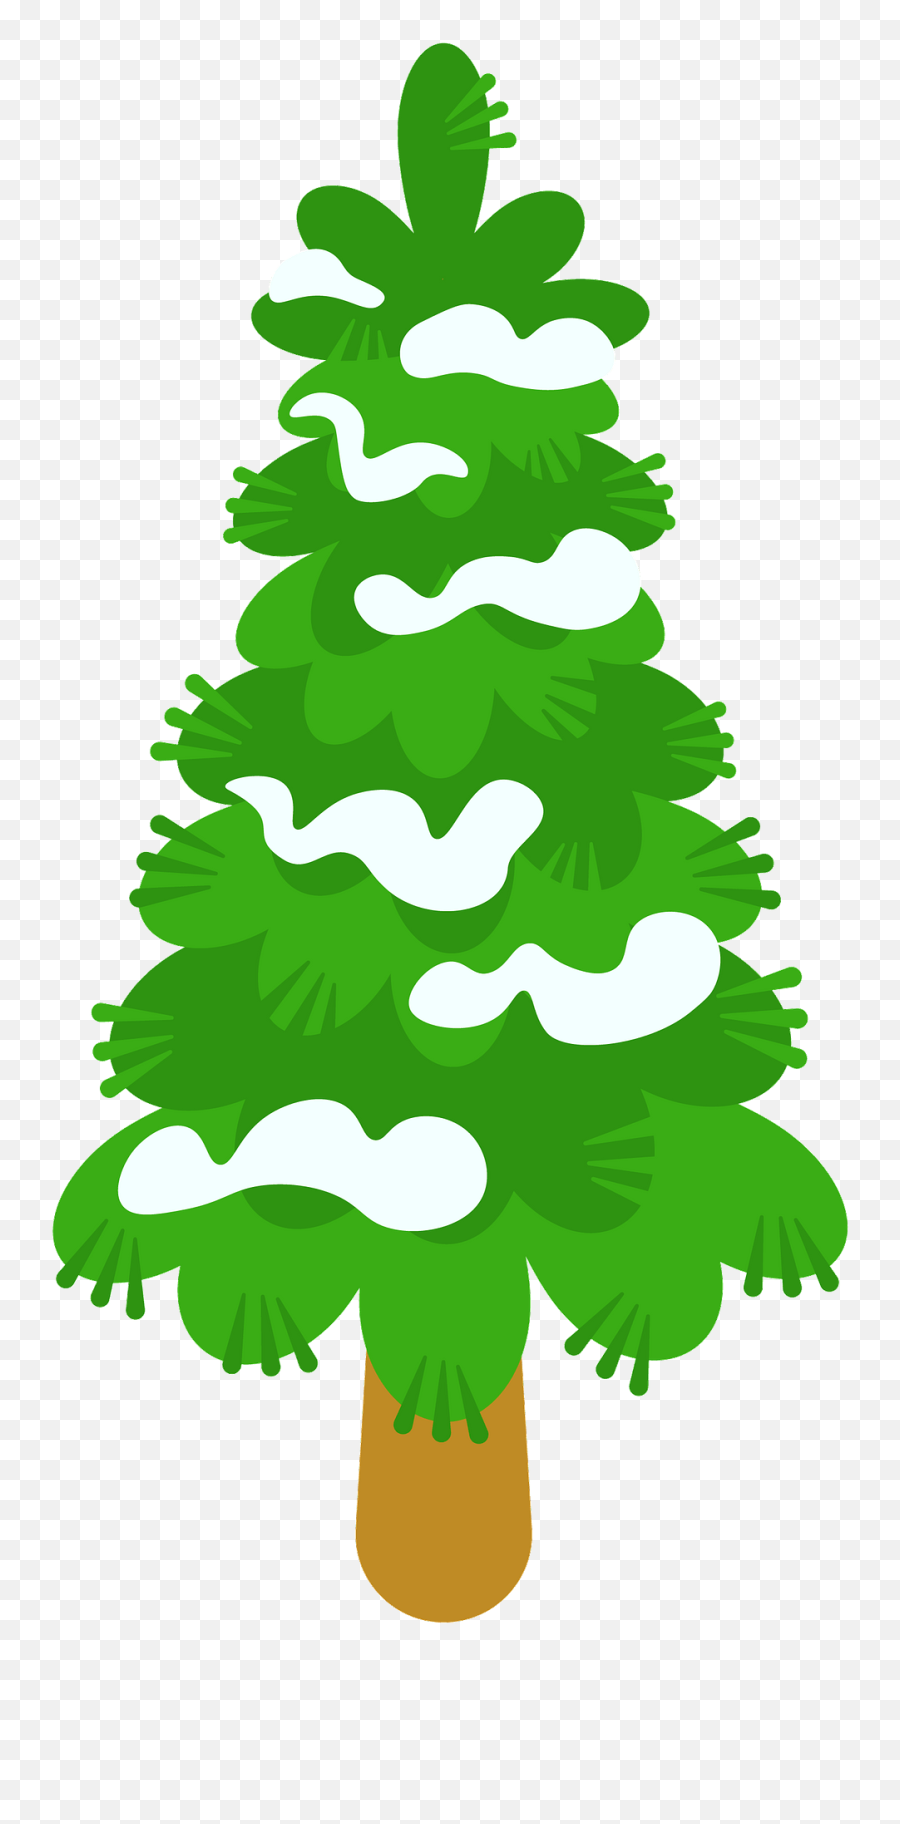 Free Evergreen Tree Clipart Download Free Clip Art Free - Christmas Tree Emoji,Free Christmas Tree Clipart